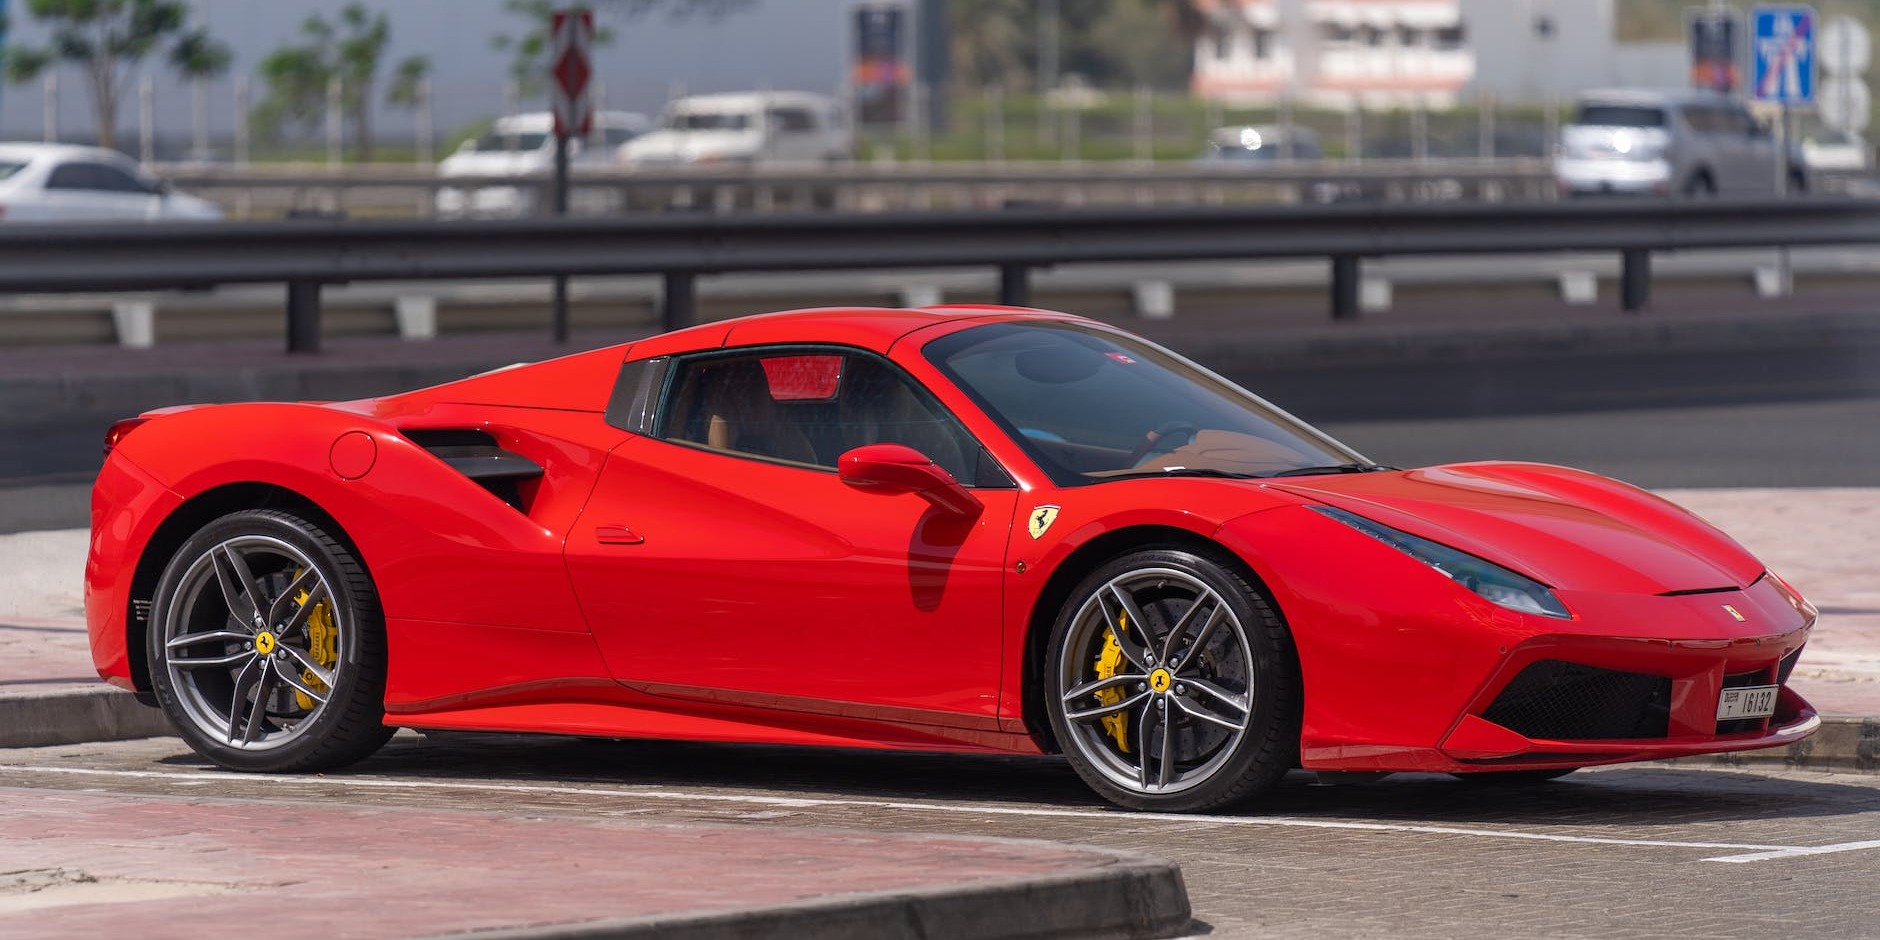 How to Hire a Ferrari for a Weekend in London